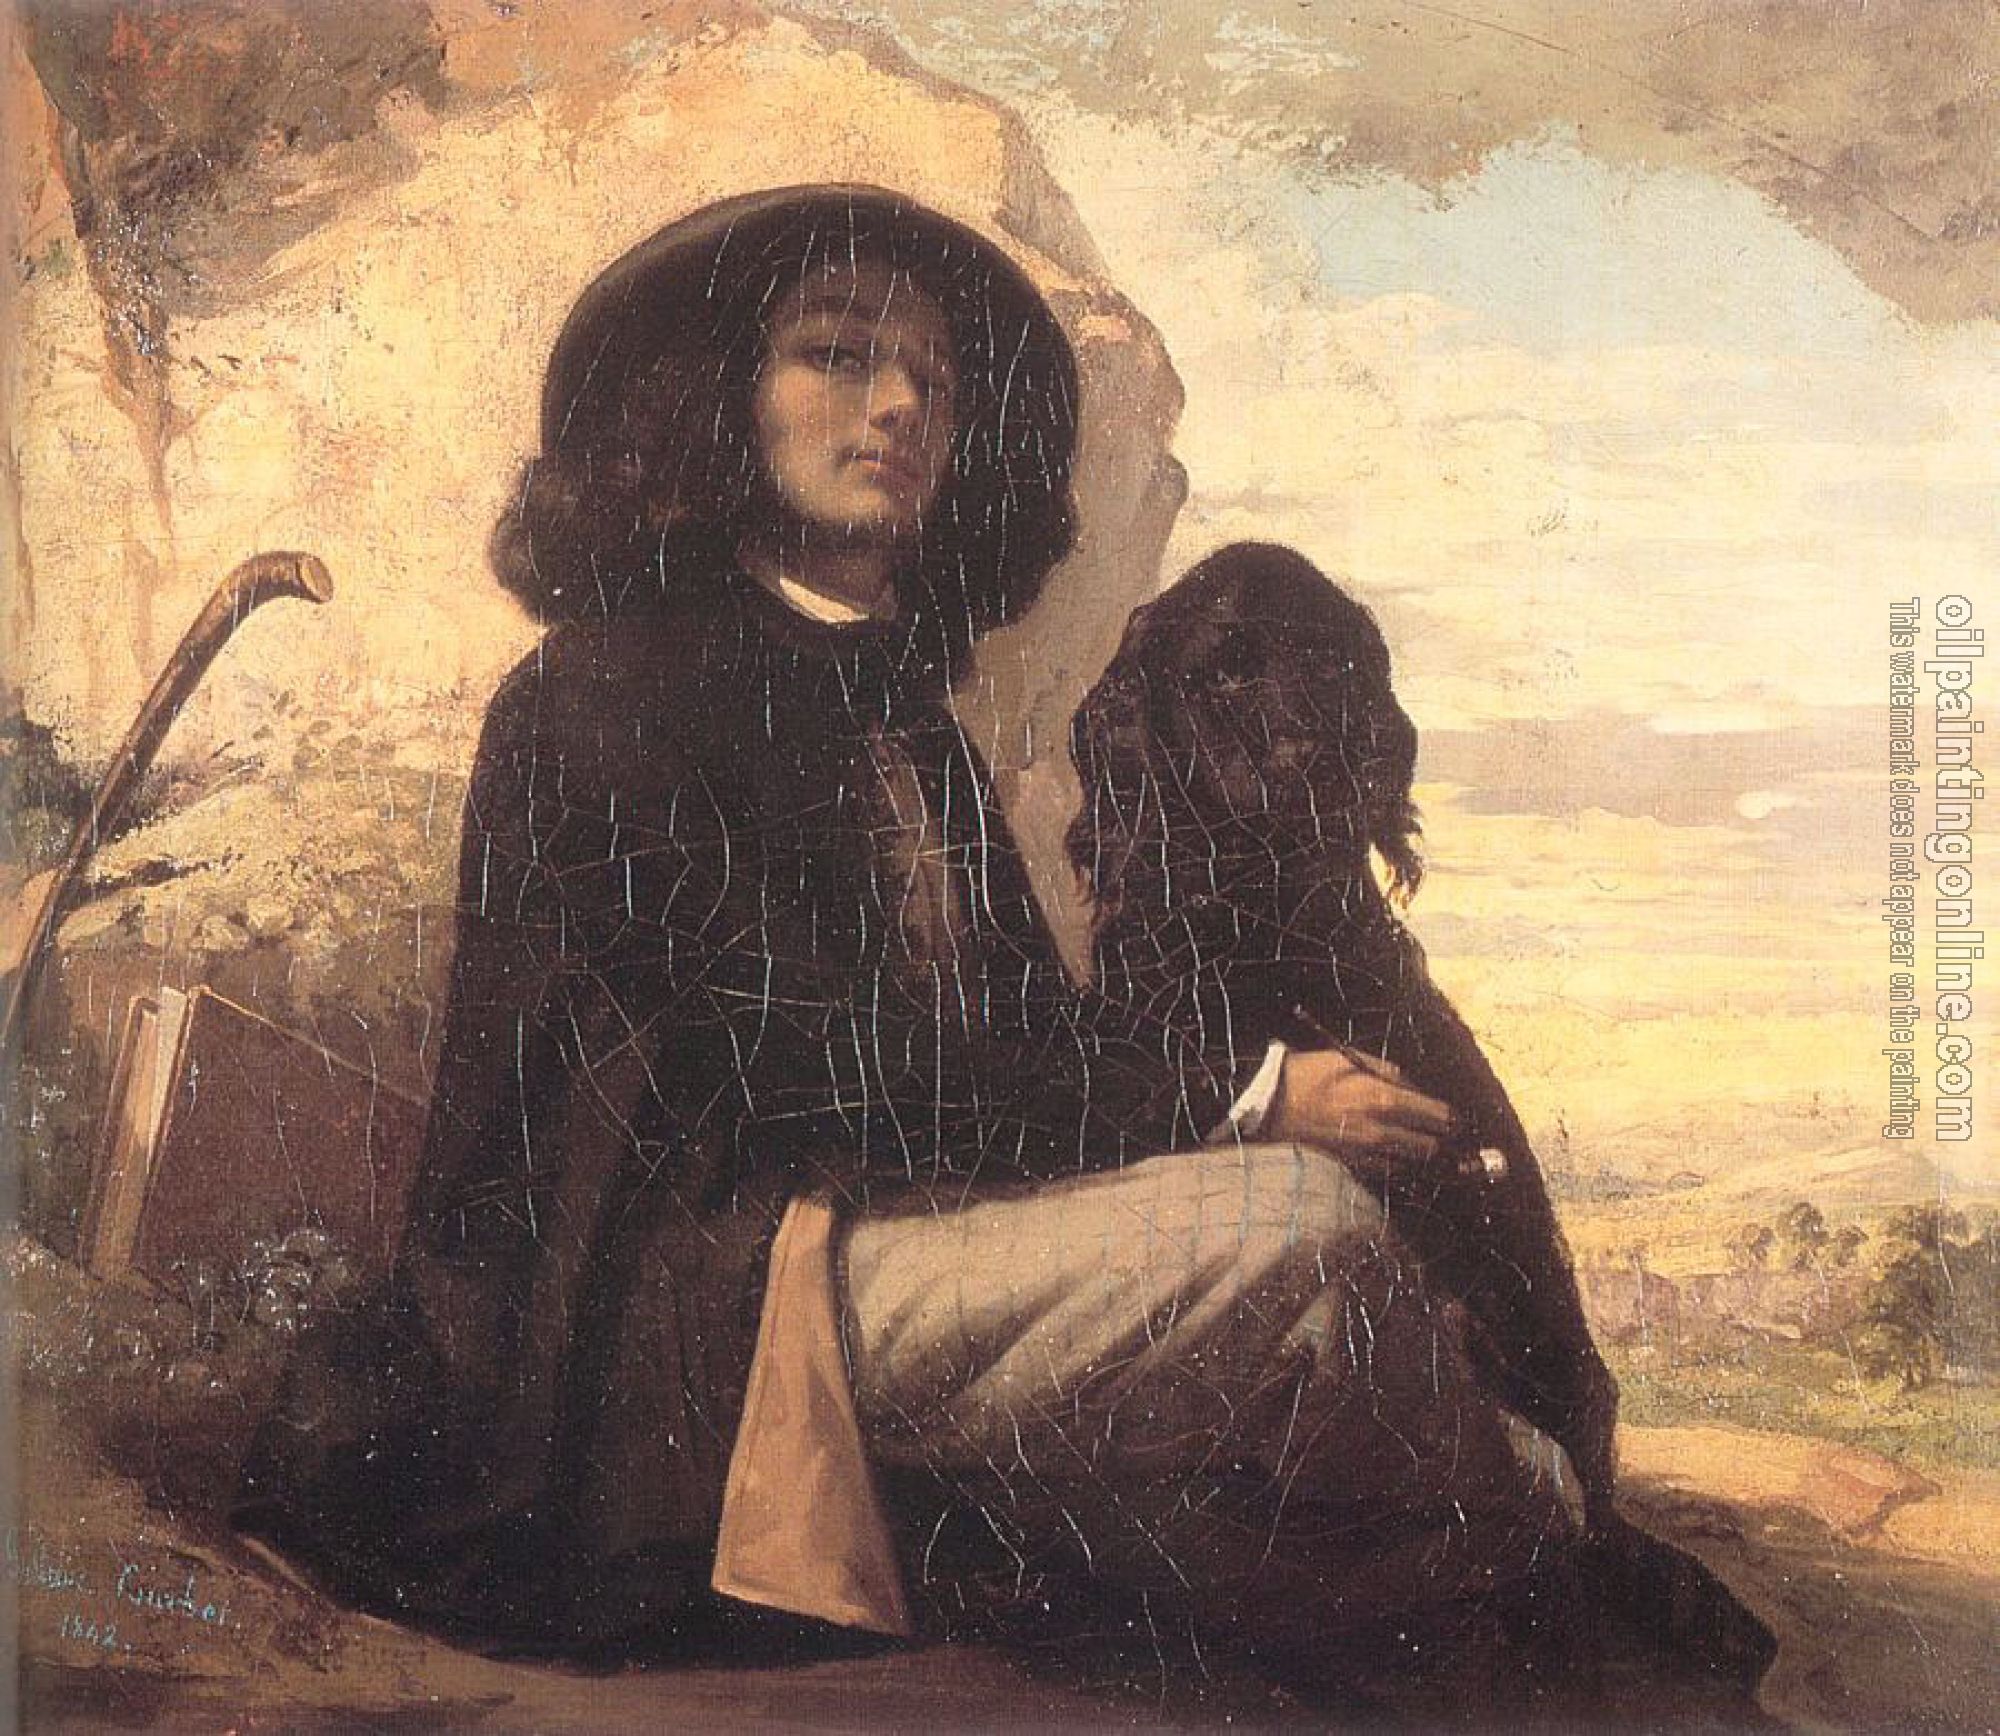 Courbet, Gustave - Self Portrait( Courbet with a Black Dog)